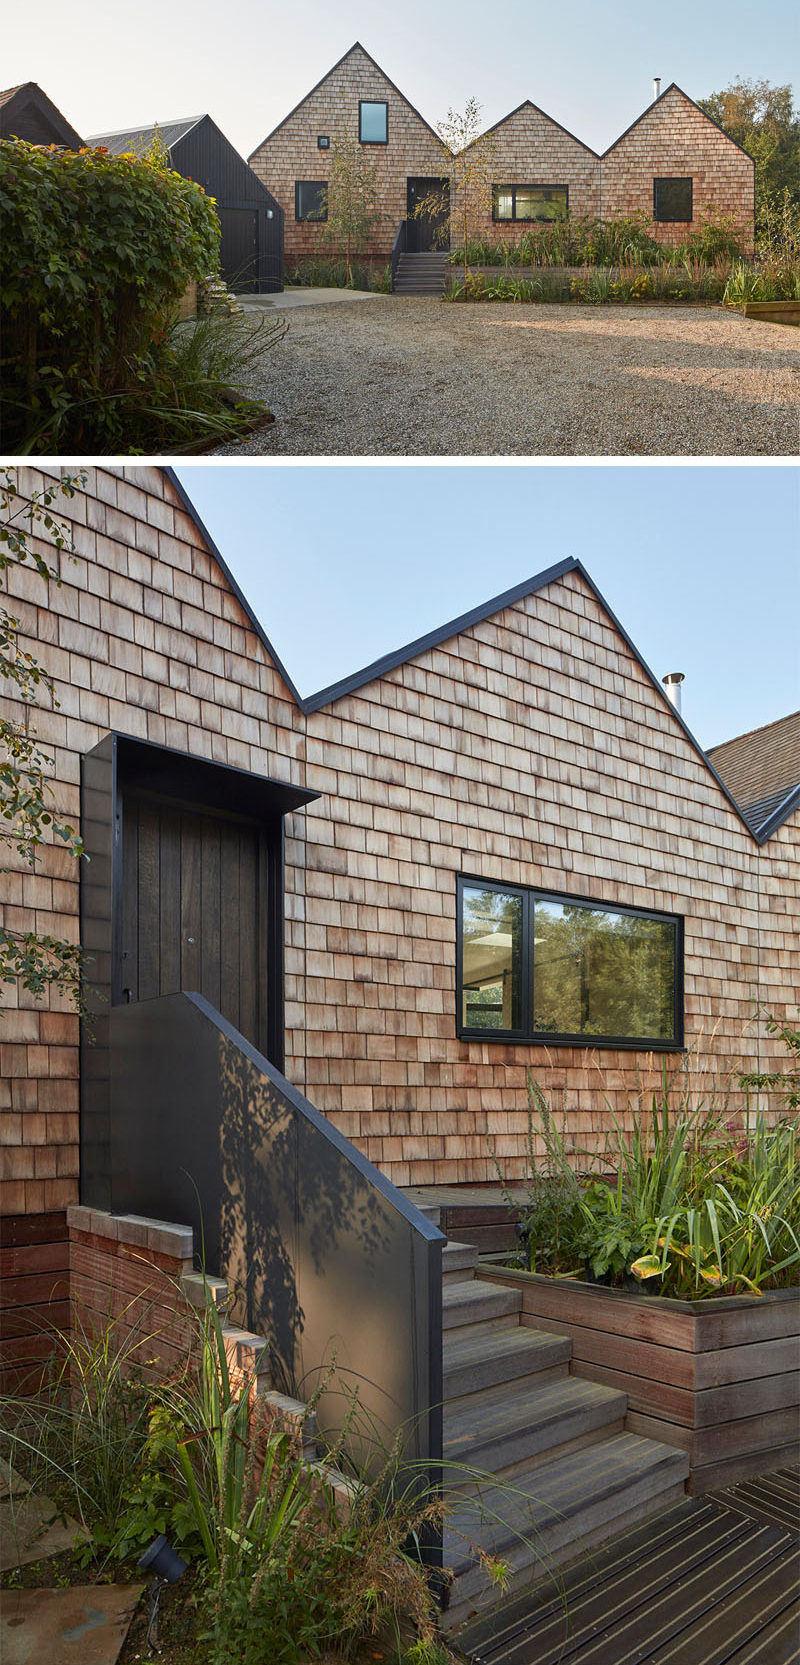 This modern house is covered in wood shingles, and planter boxes hide the ramp leading to the front door.